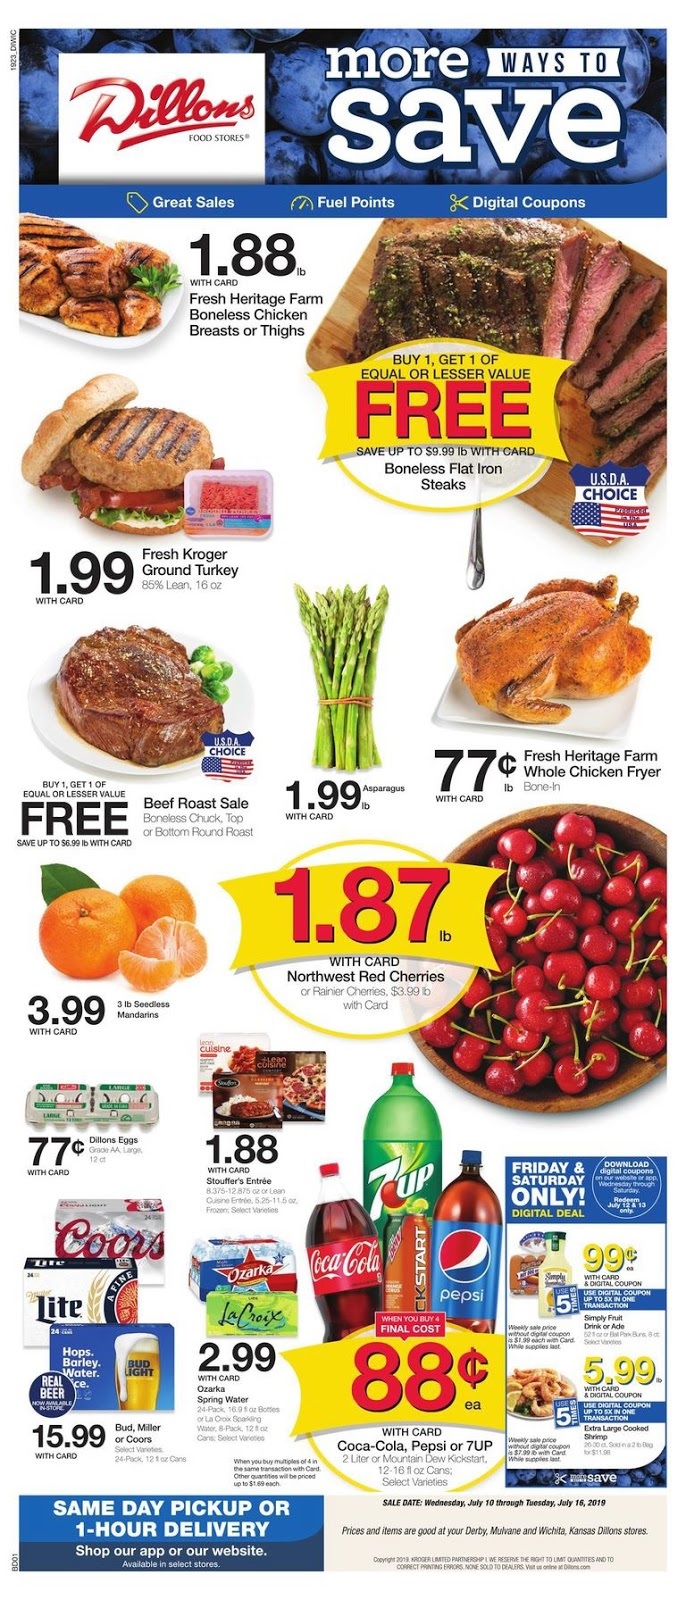 Dillons Ad Preview July 10 - July 16, 2019